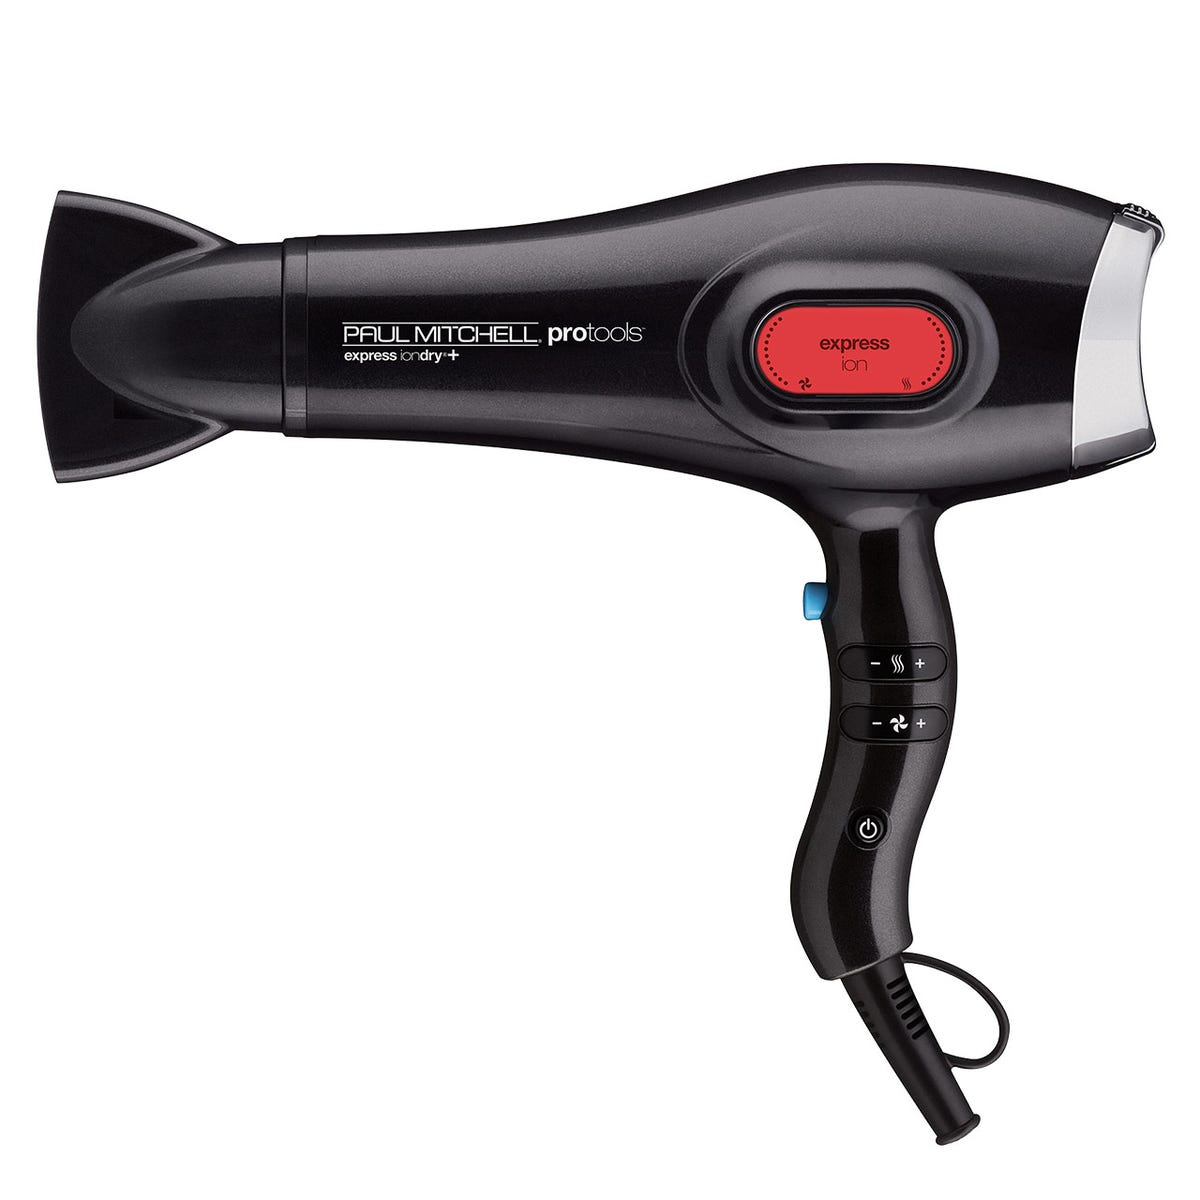 Express Ion Dry+ Hair Dryer